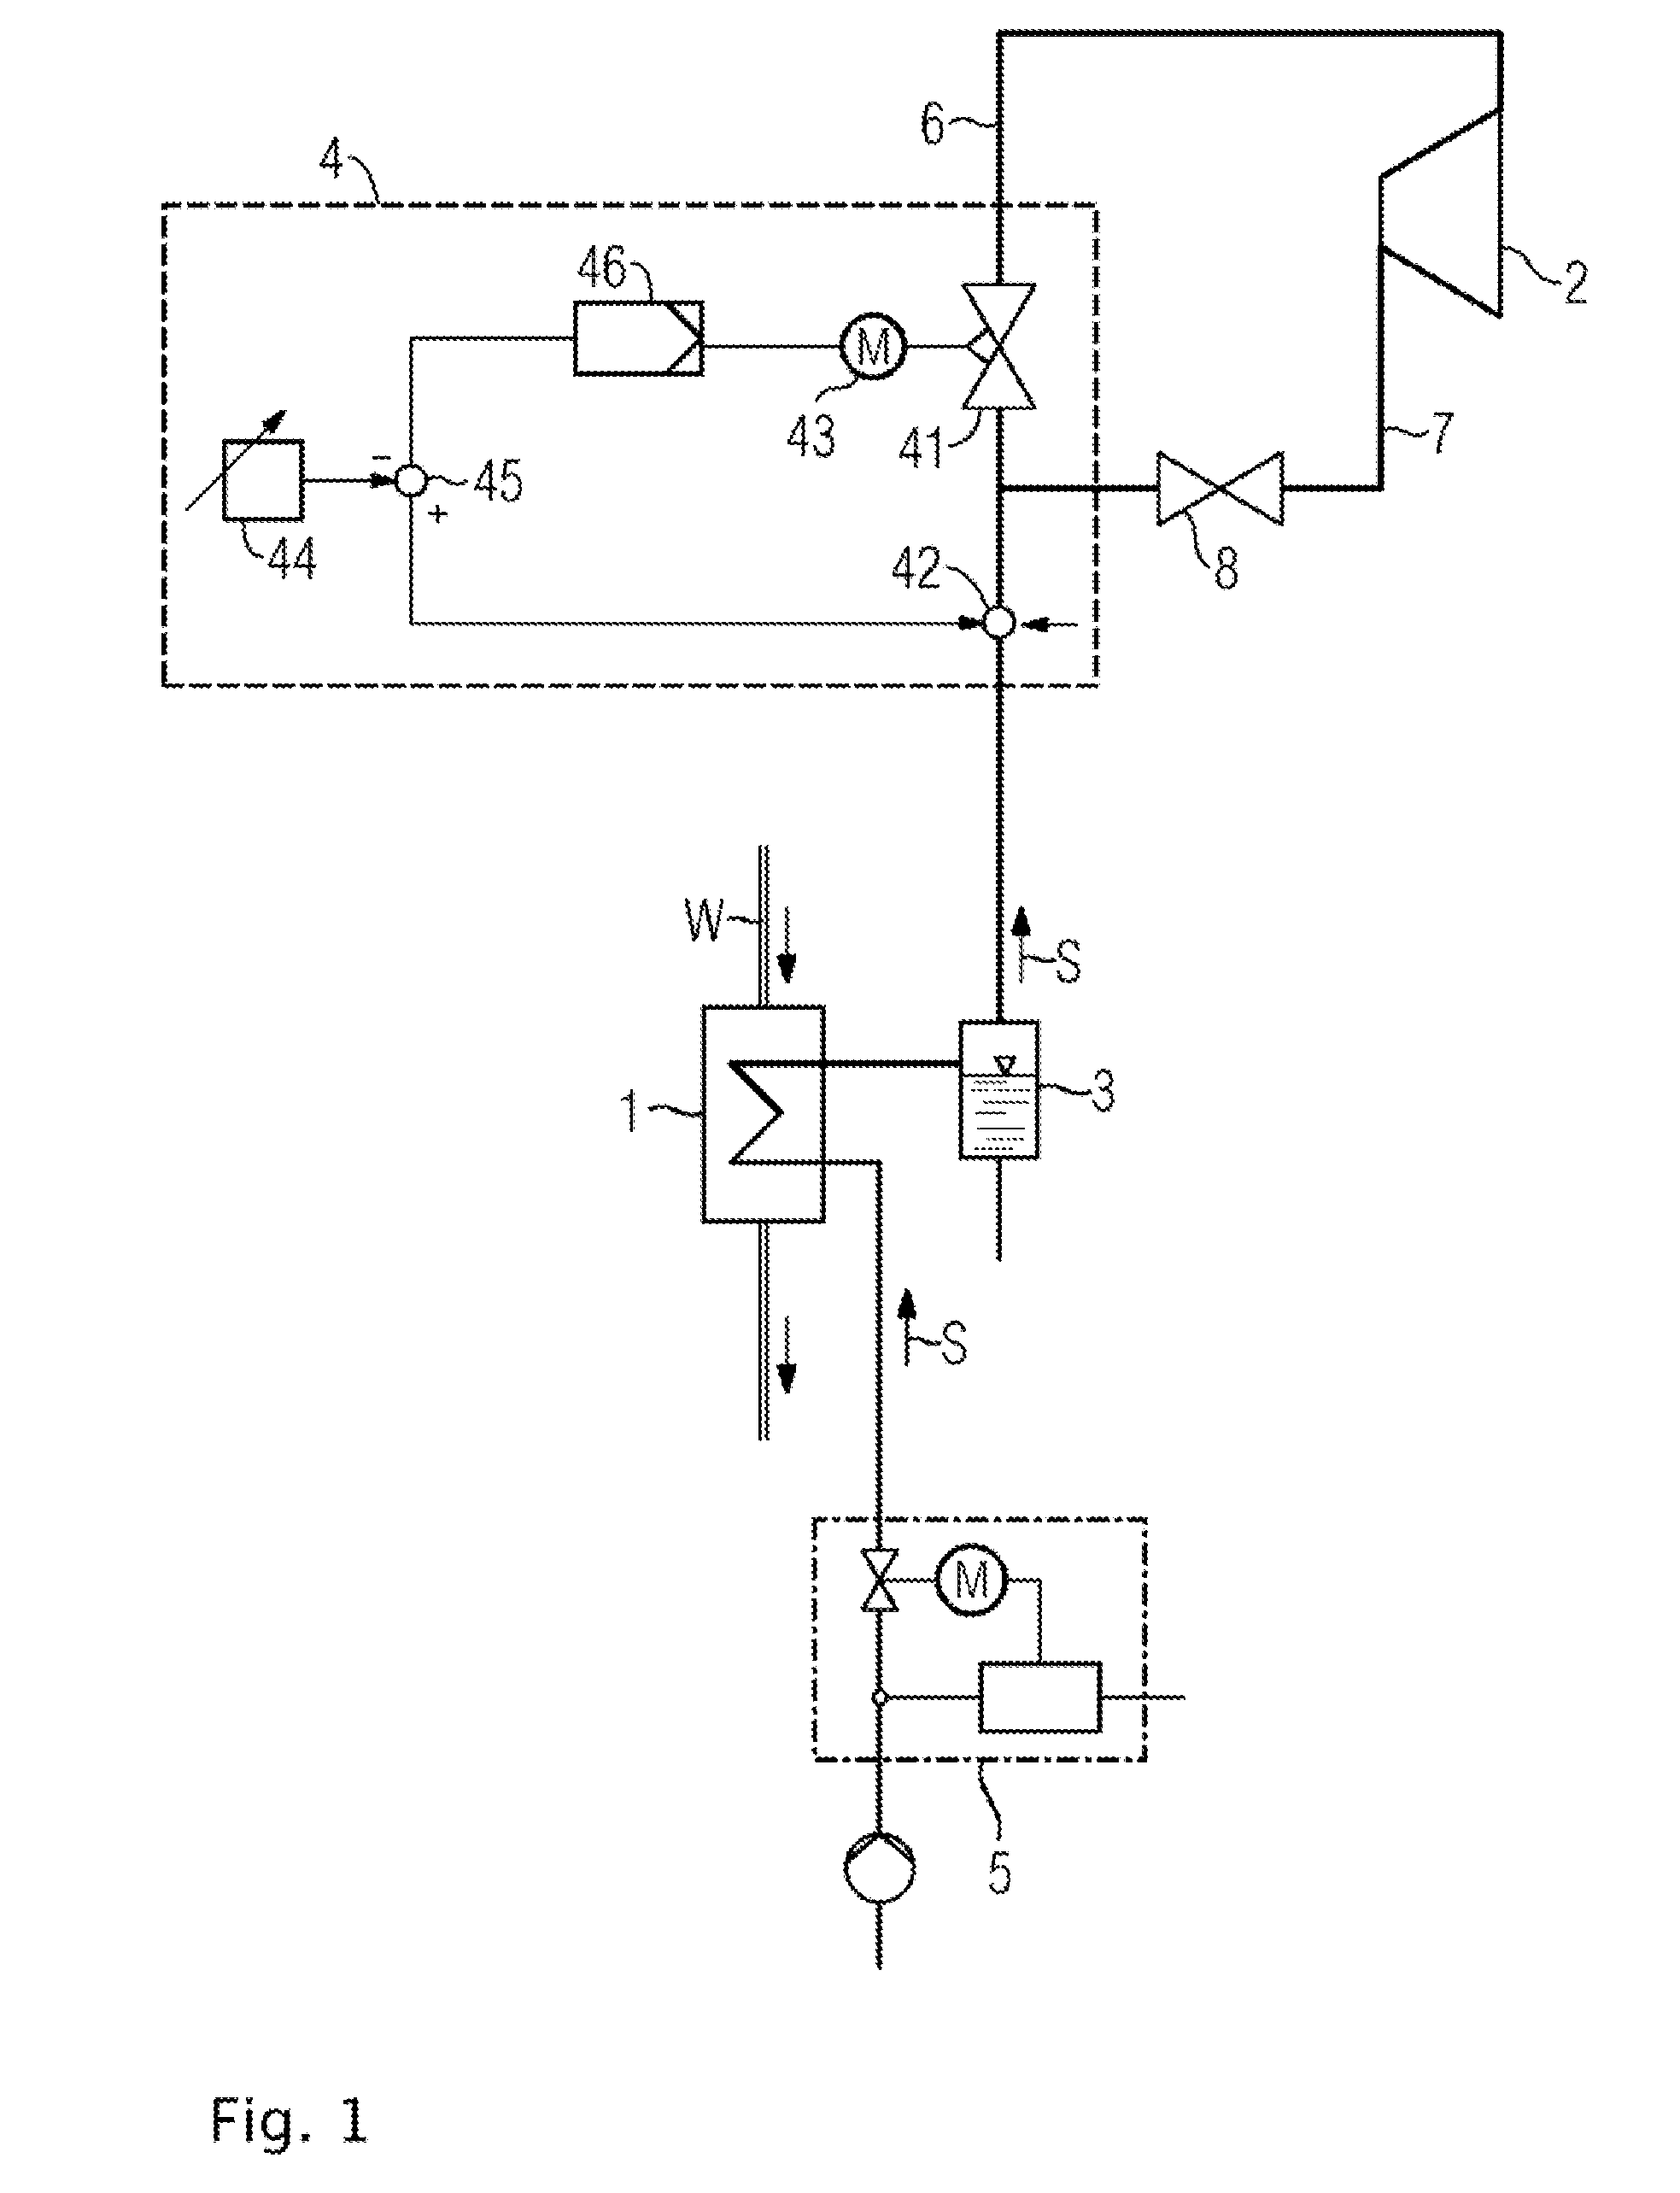 Operating method for starting a once-through steam generator heated using solar thermal energy